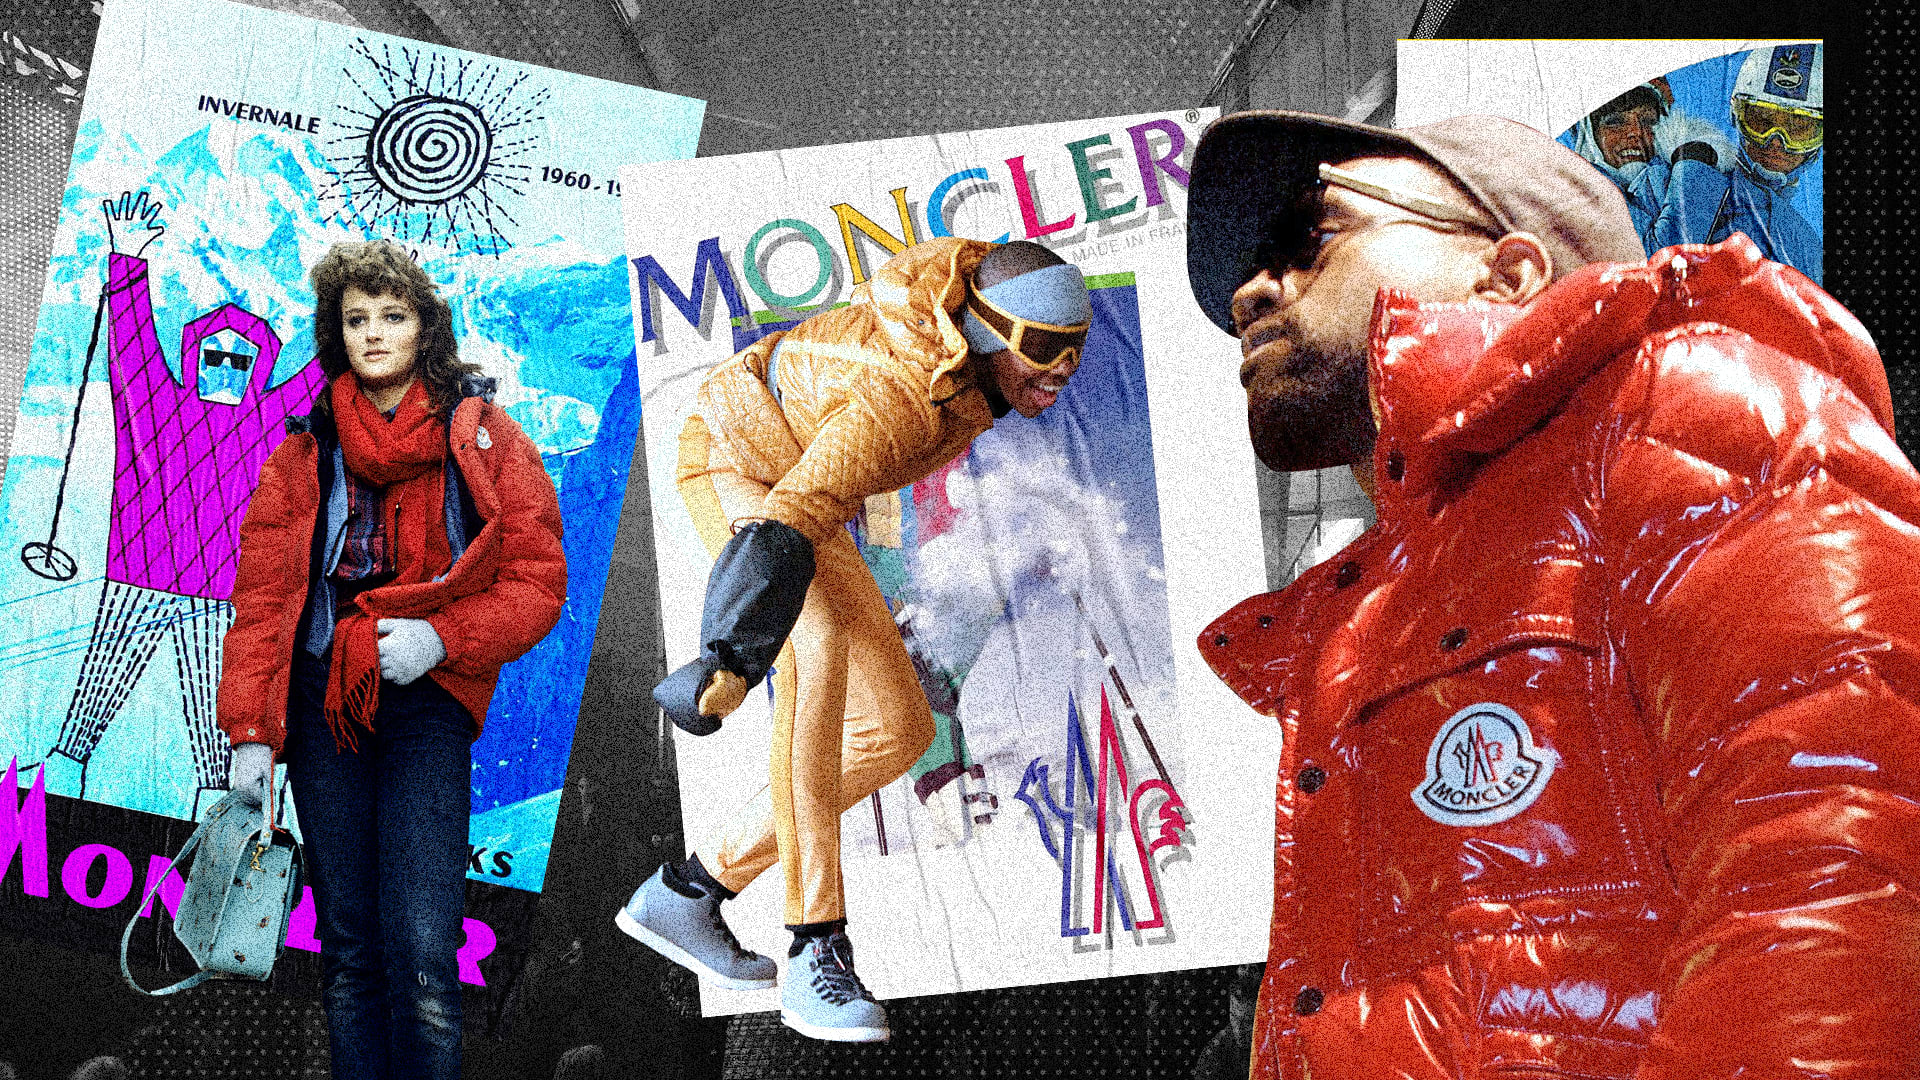 Moncler NYC collage overview